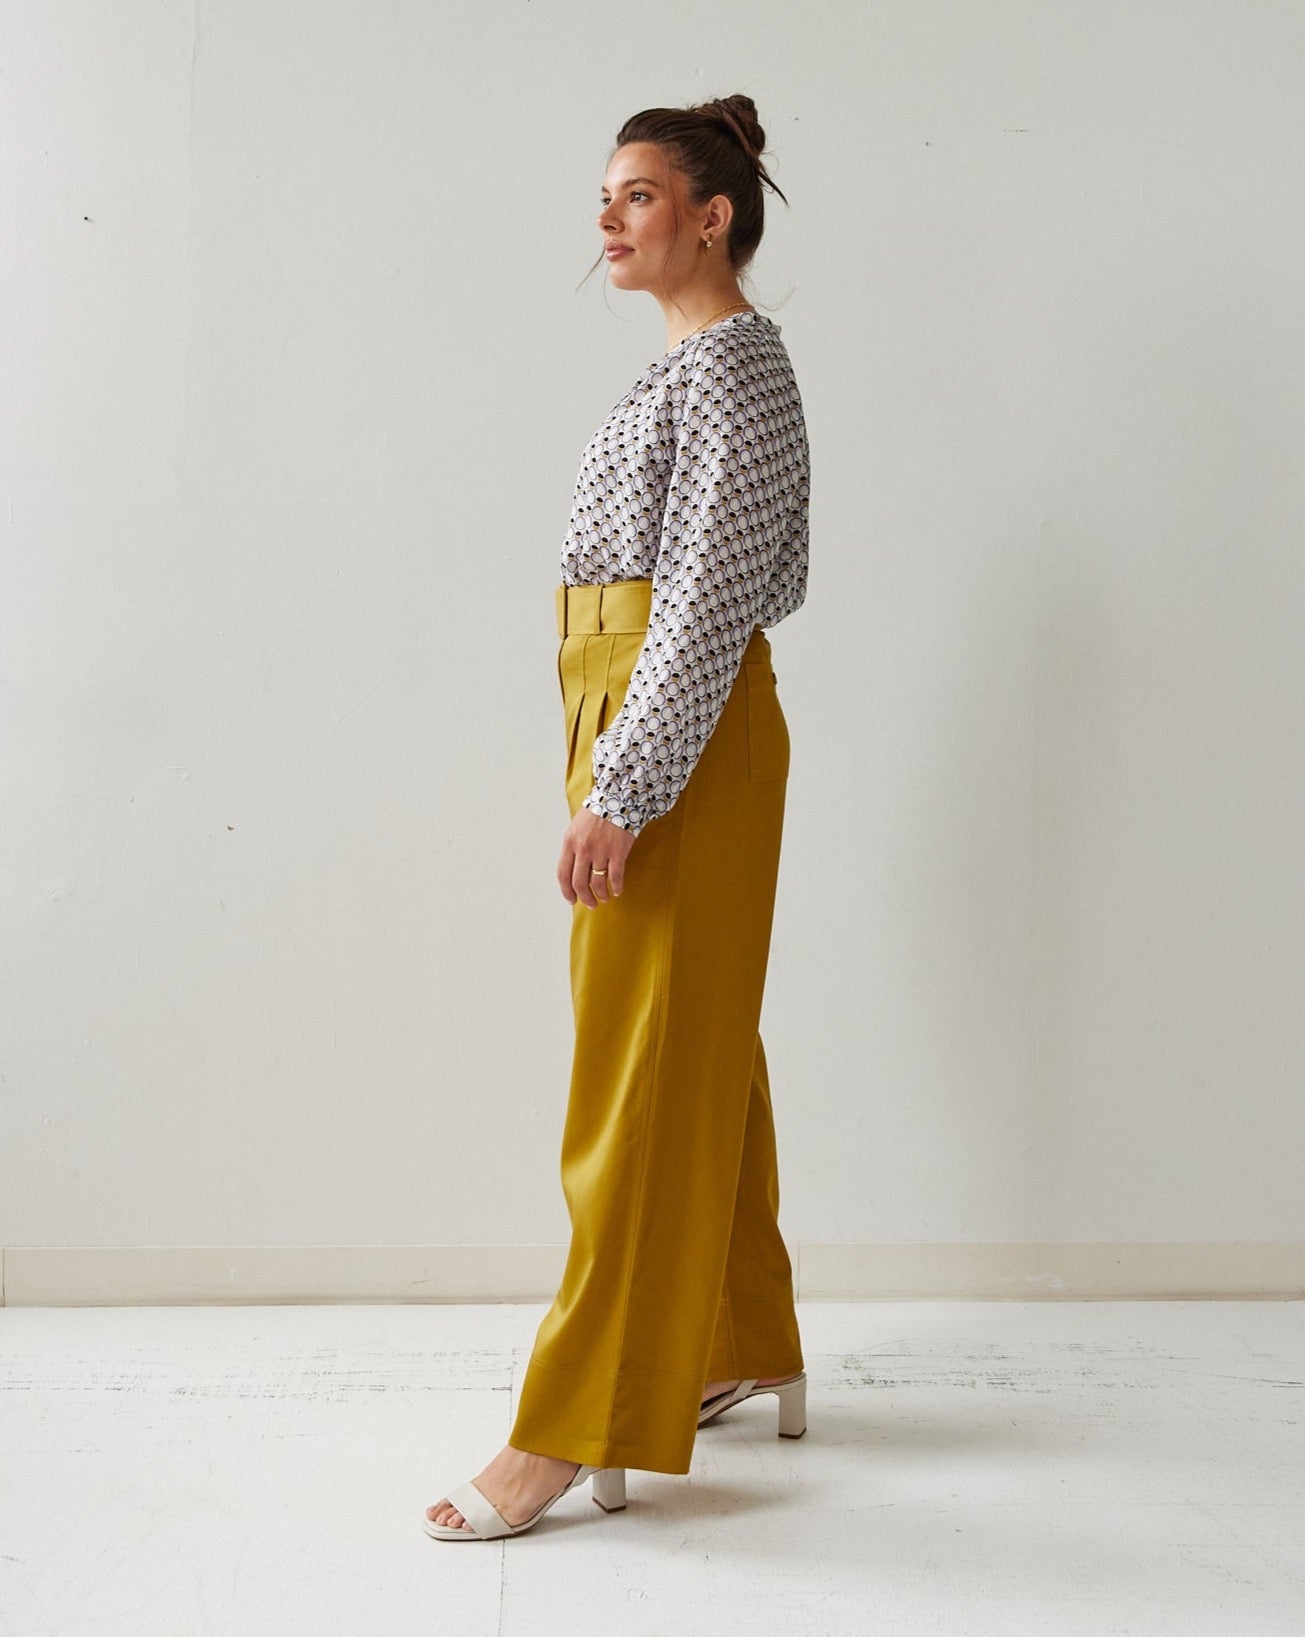 The Belted Trouser